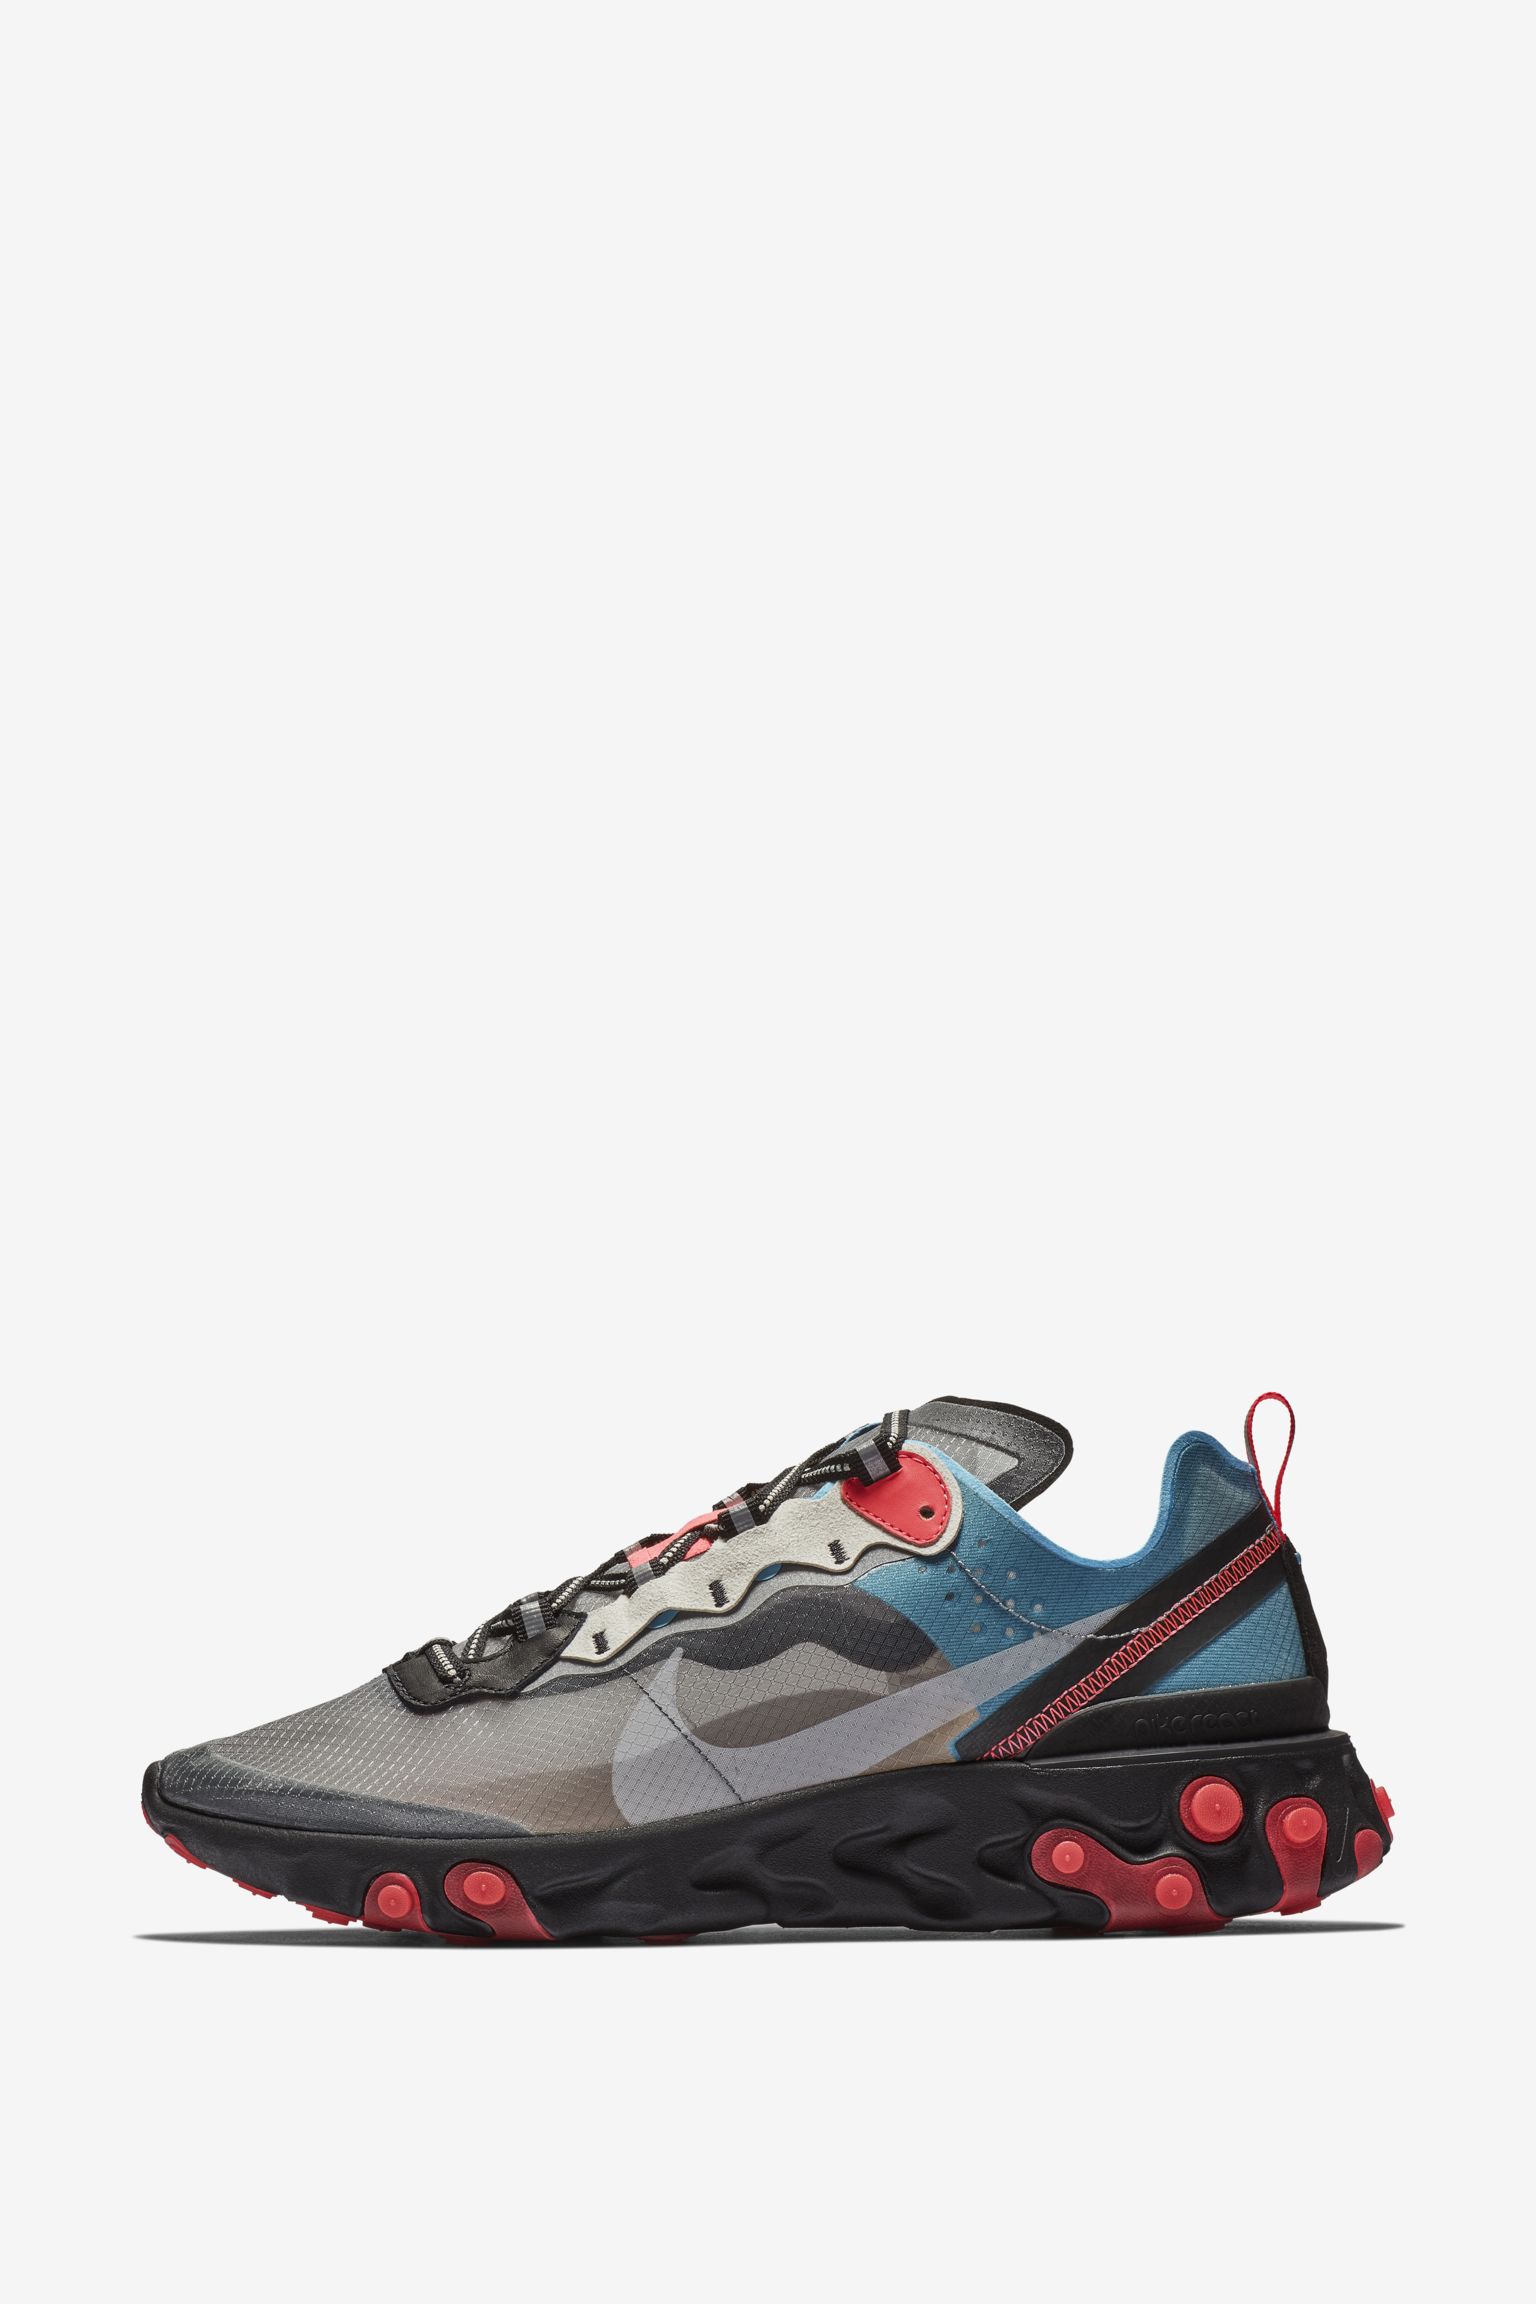 nike react element 87 red and black